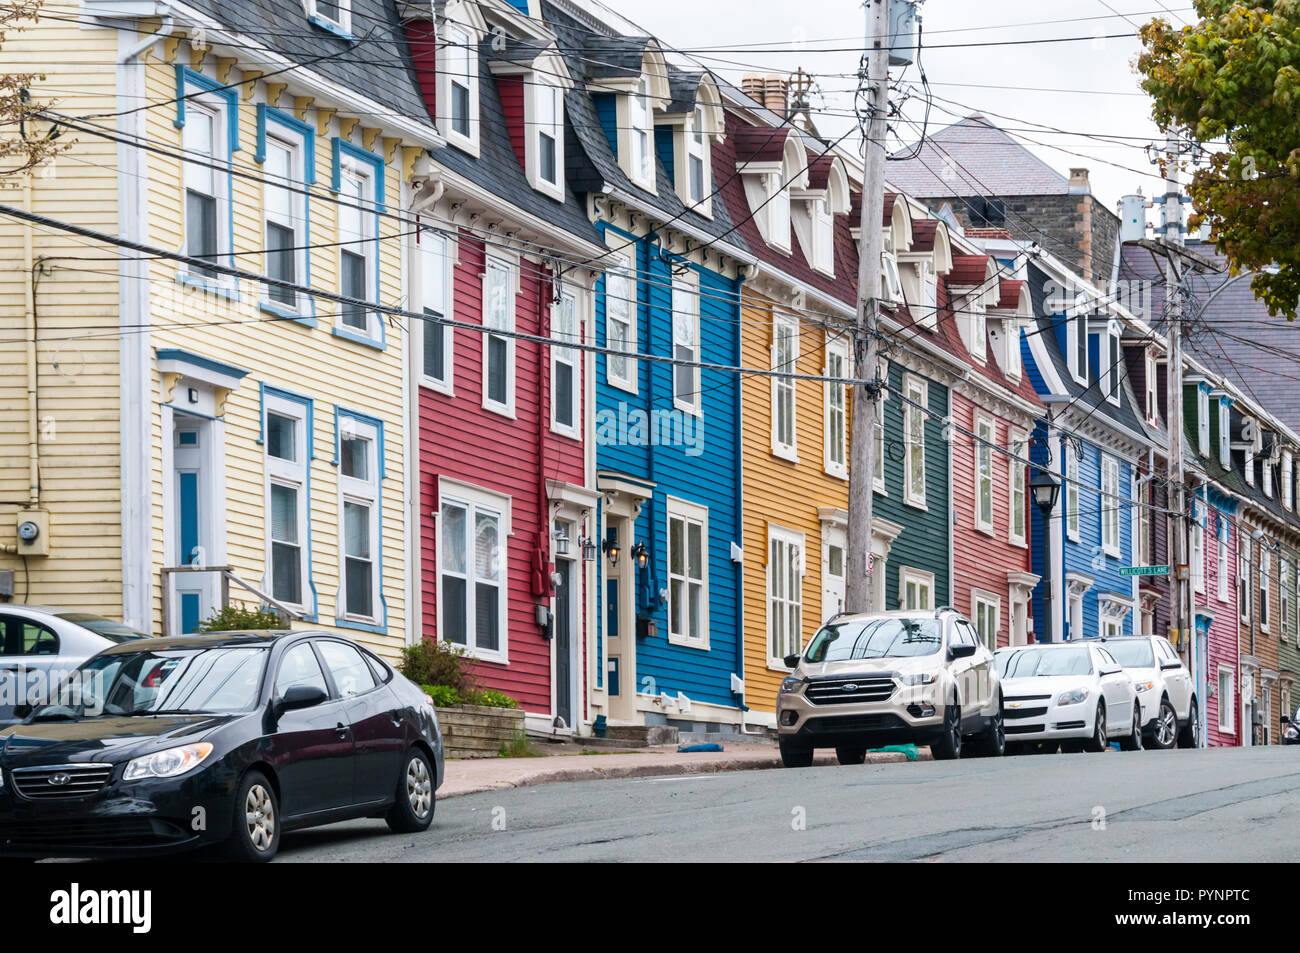 Colourful houses on Gower Street in St John's, Newfoundland. Stock Photo